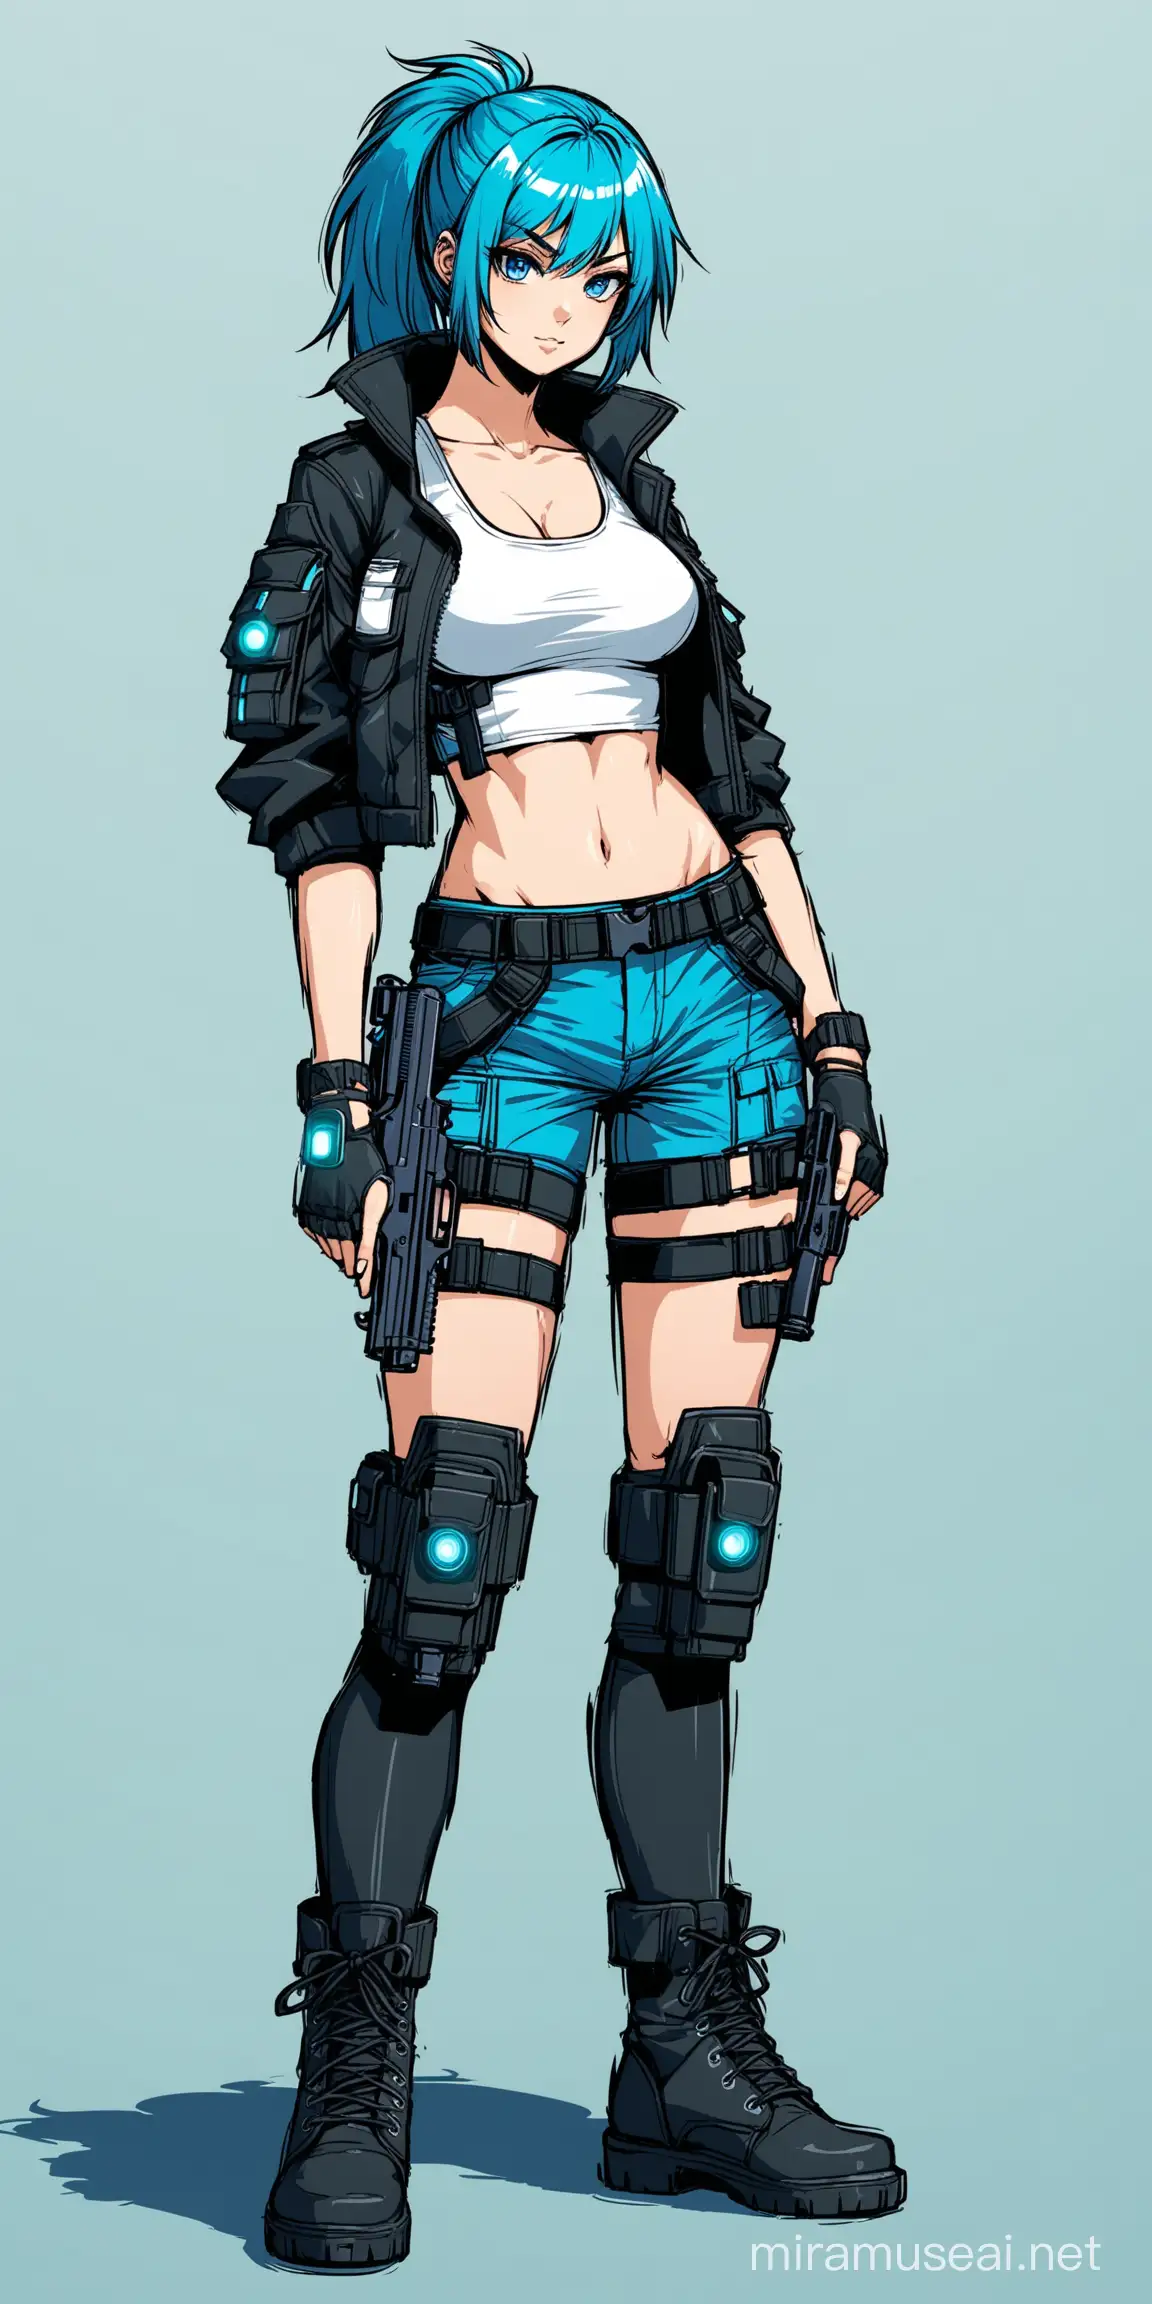 Cyberpunk Heroine with Handguns Bold and Sexy 24YearOld Woman in Blue Hair and Combat Gear